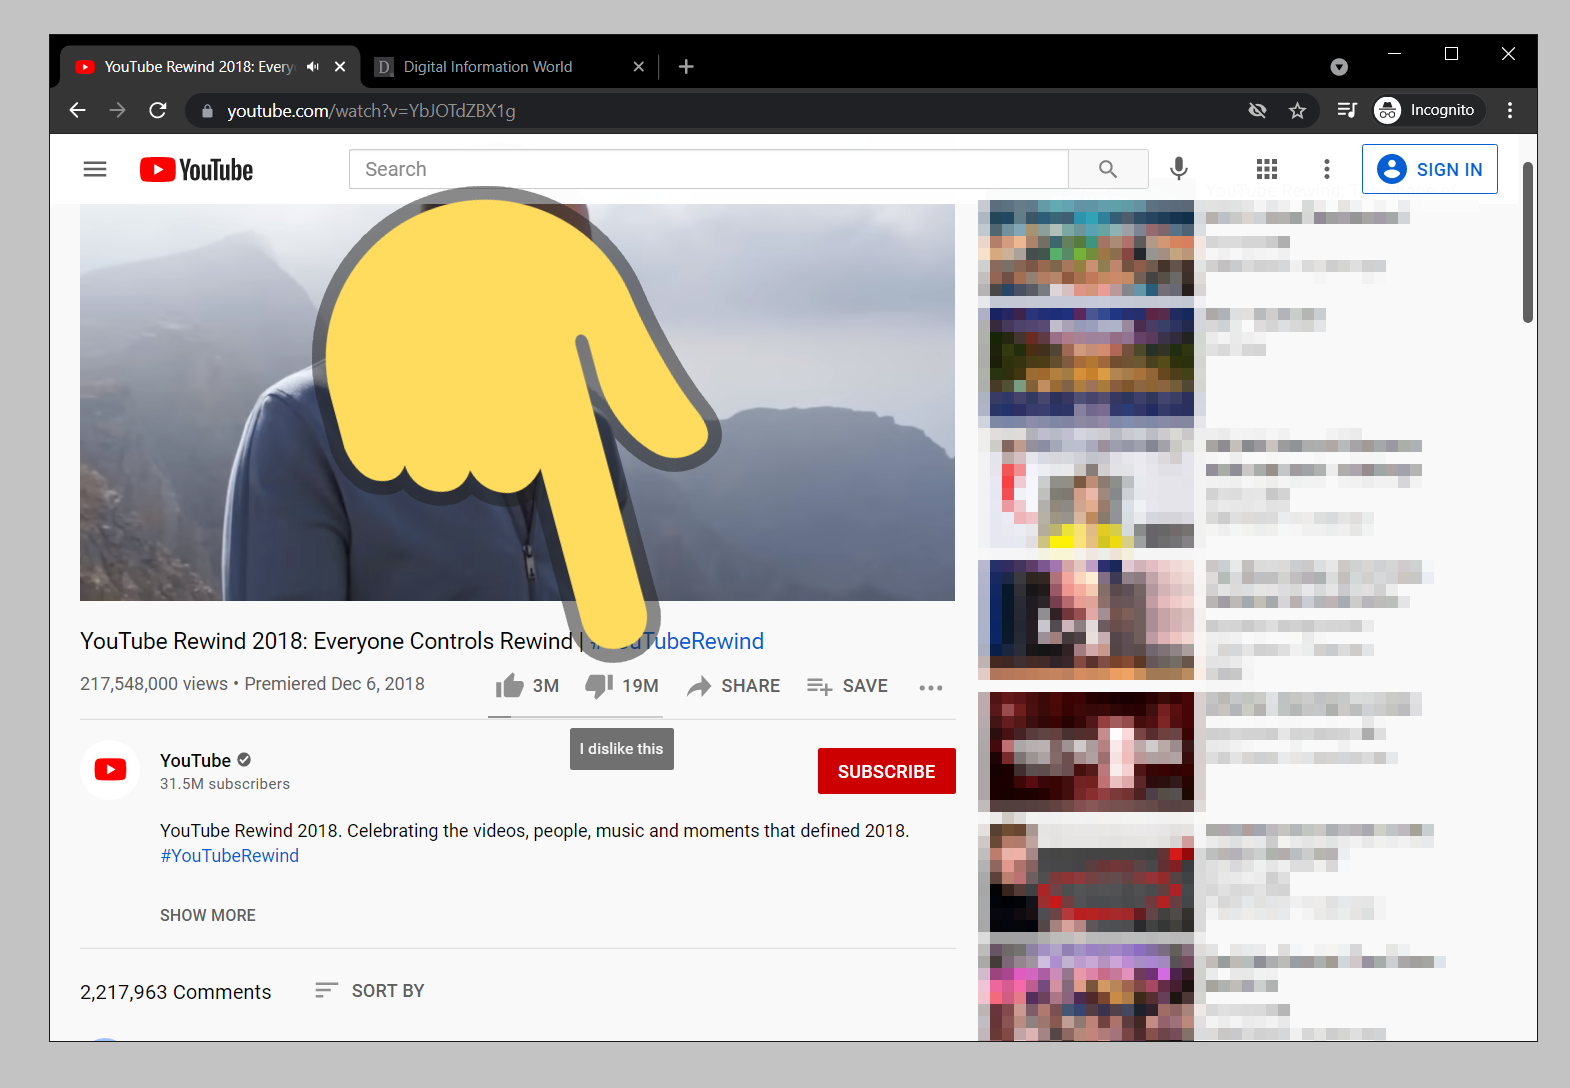 YouTube Is About To Say Goodbye To Dislike Counts From Videos (On The Web)